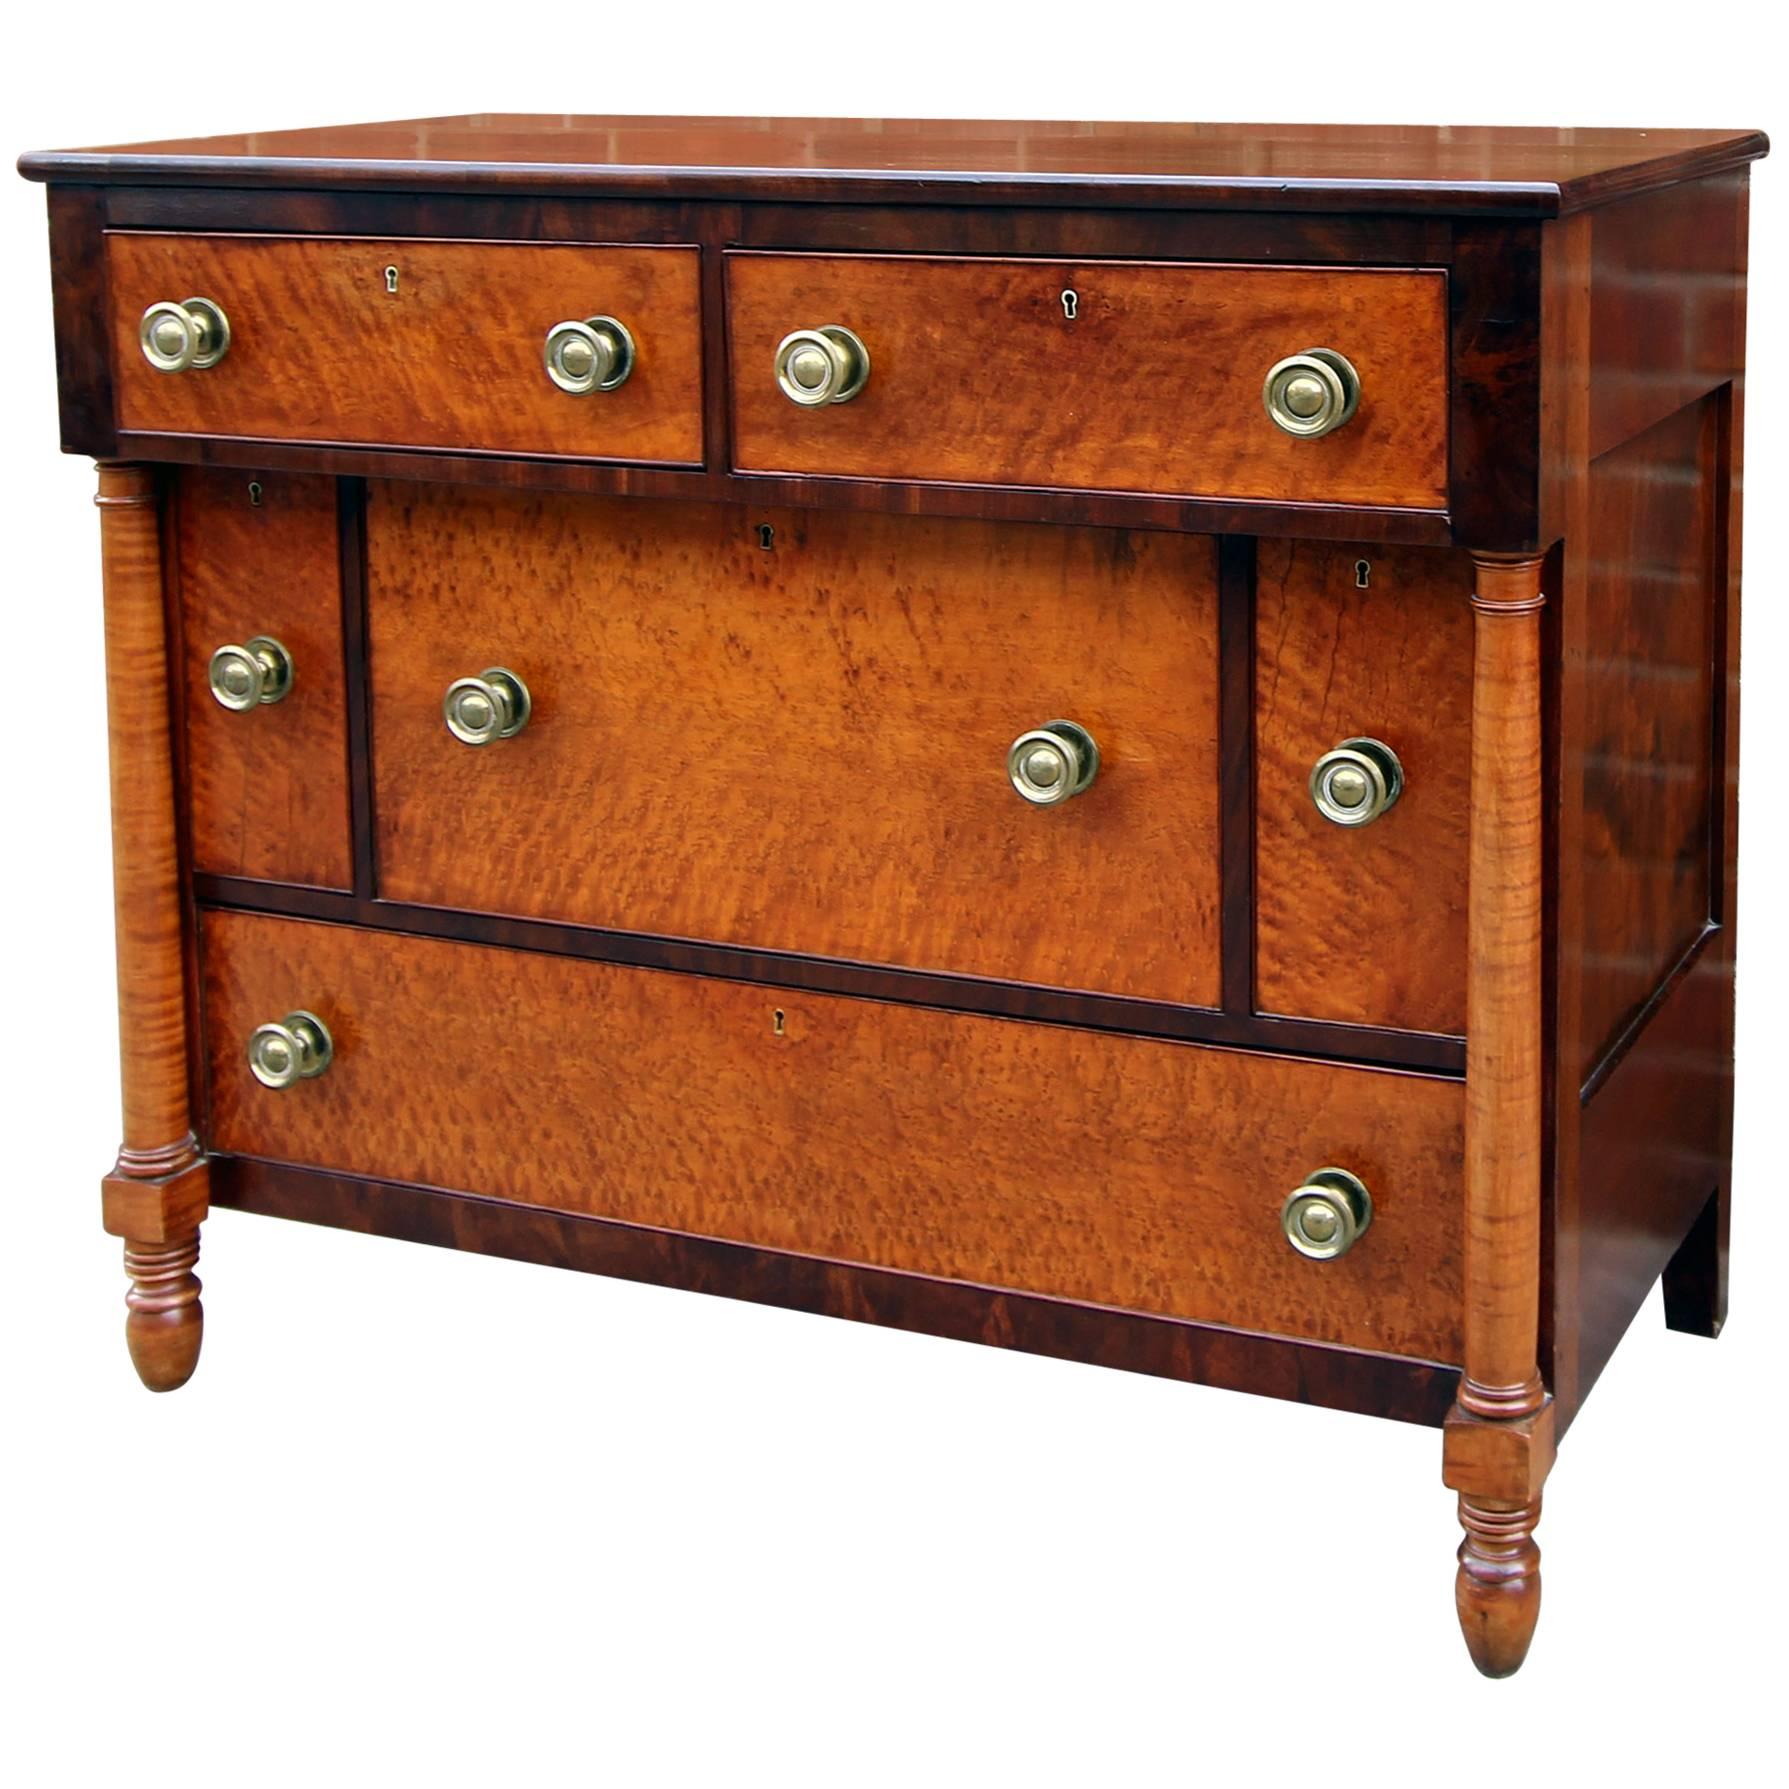 Maple and Mahogany Server or Chest with Bottle Drawers, 19th Century, American